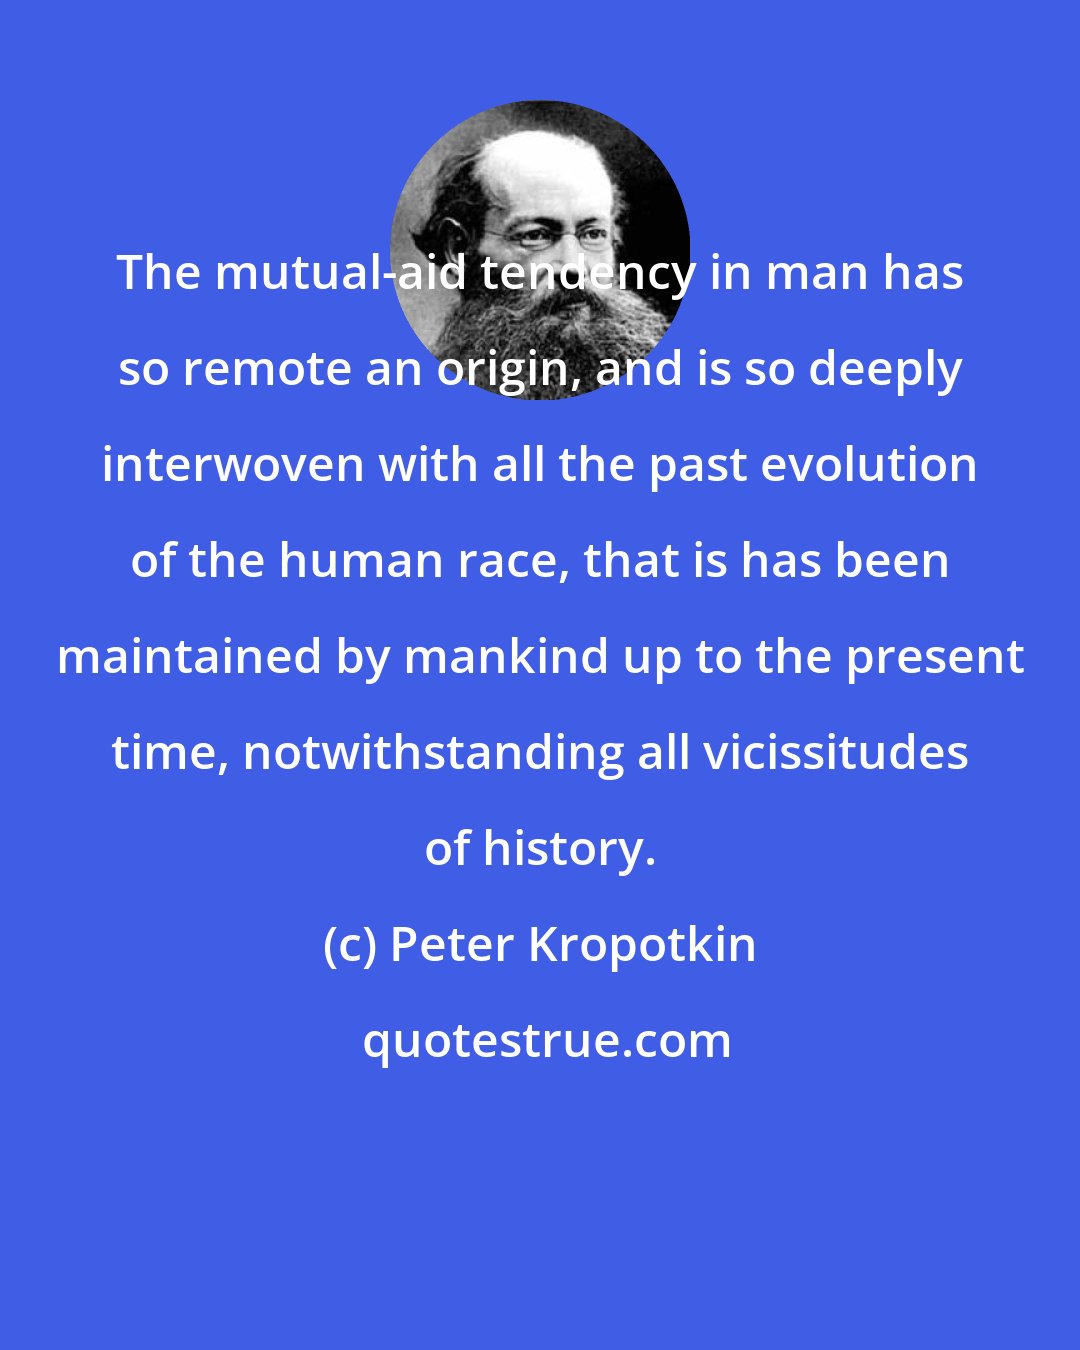 Peter Kropotkin: The mutual-aid tendency in man has so remote an origin, and is so deeply interwoven with all the past evolution of the human race, that is has been maintained by mankind up to the present time, notwithstanding all vicissitudes of history.